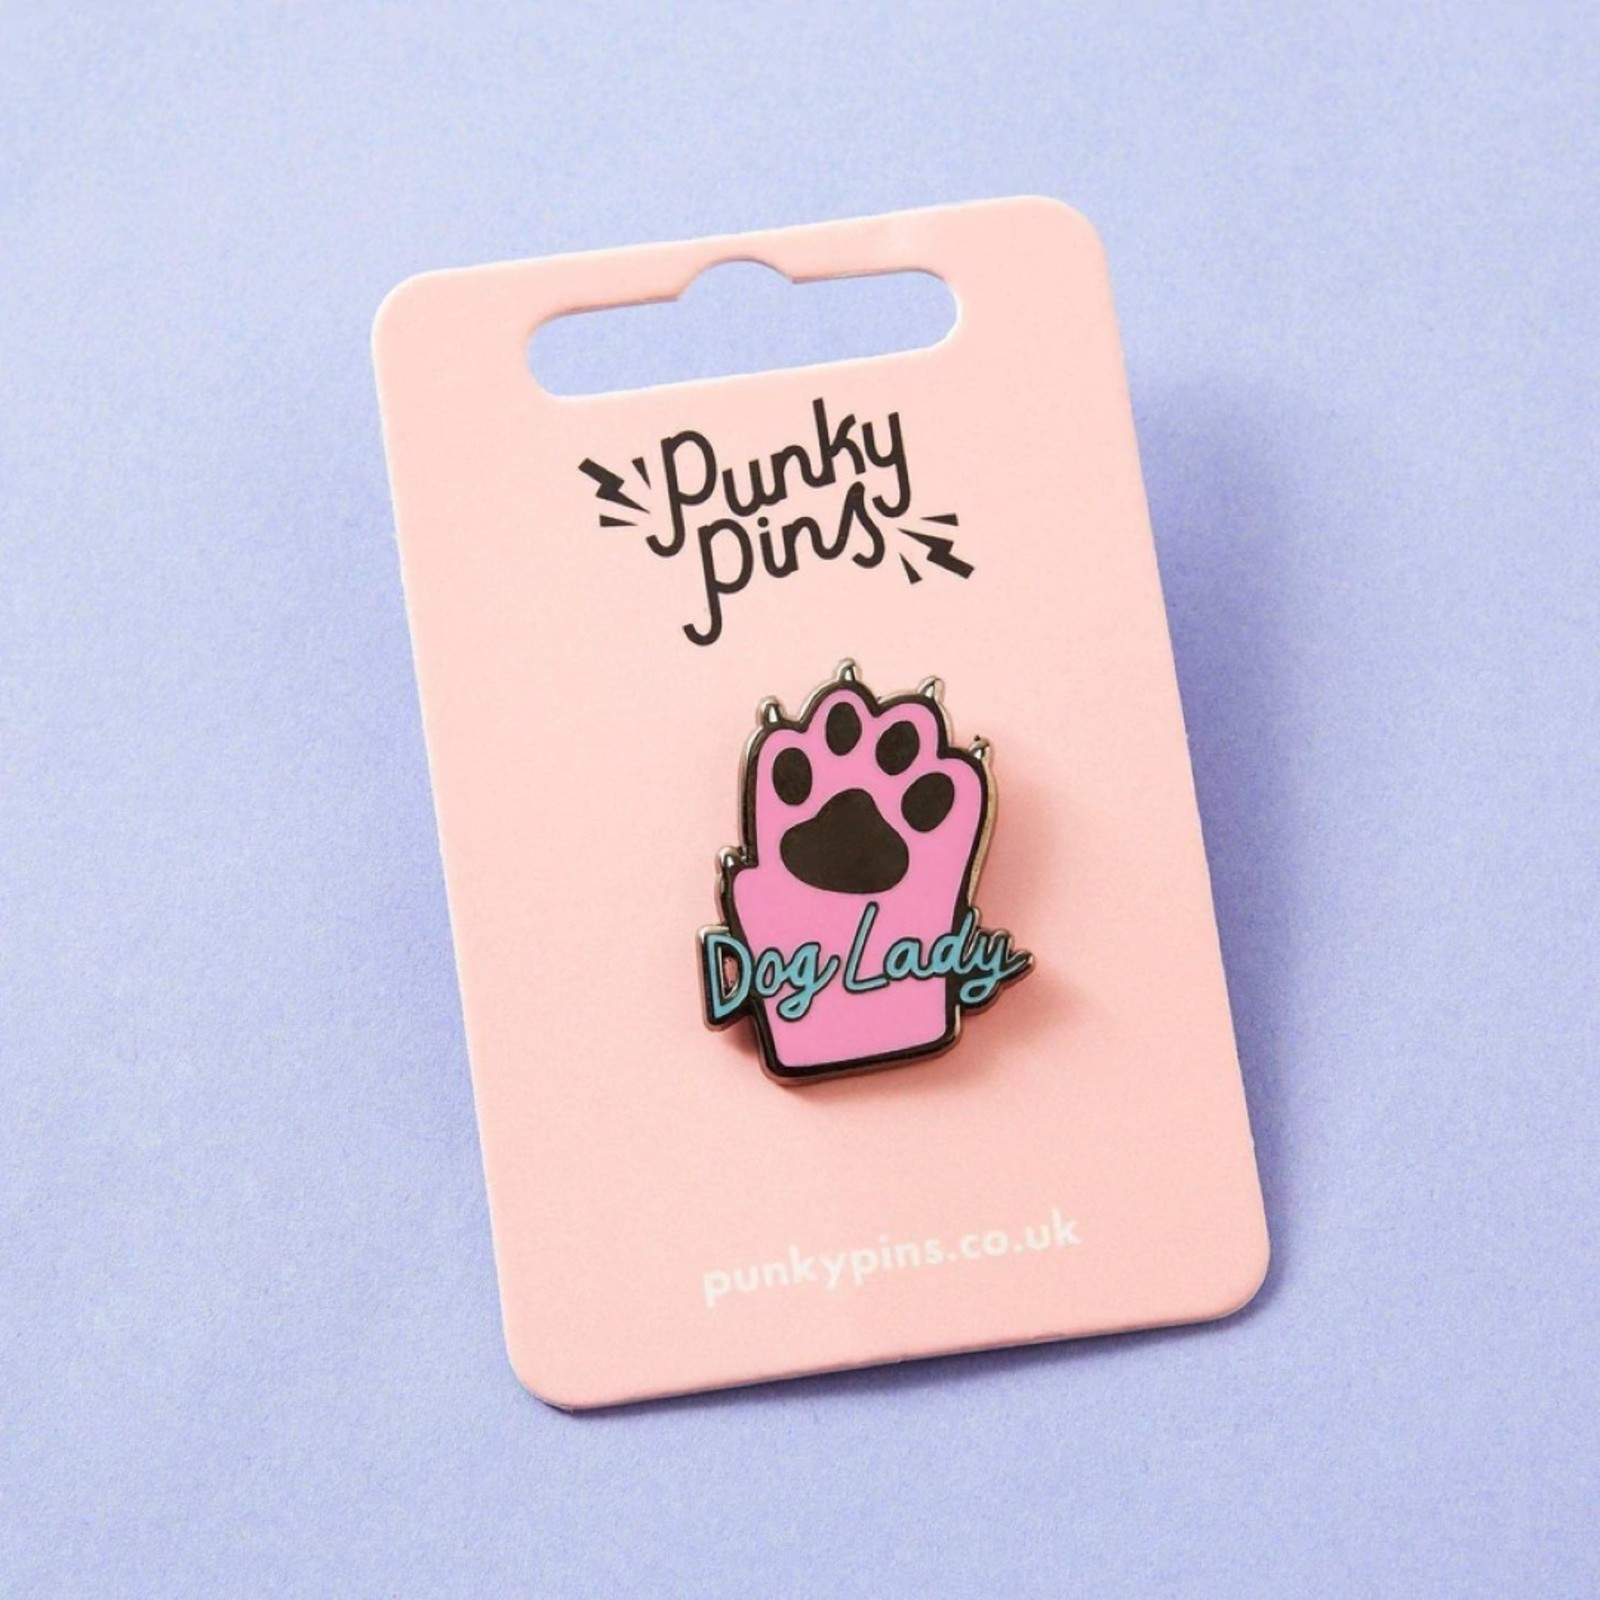 Punky Pins Dogs forever  Enamel Pin